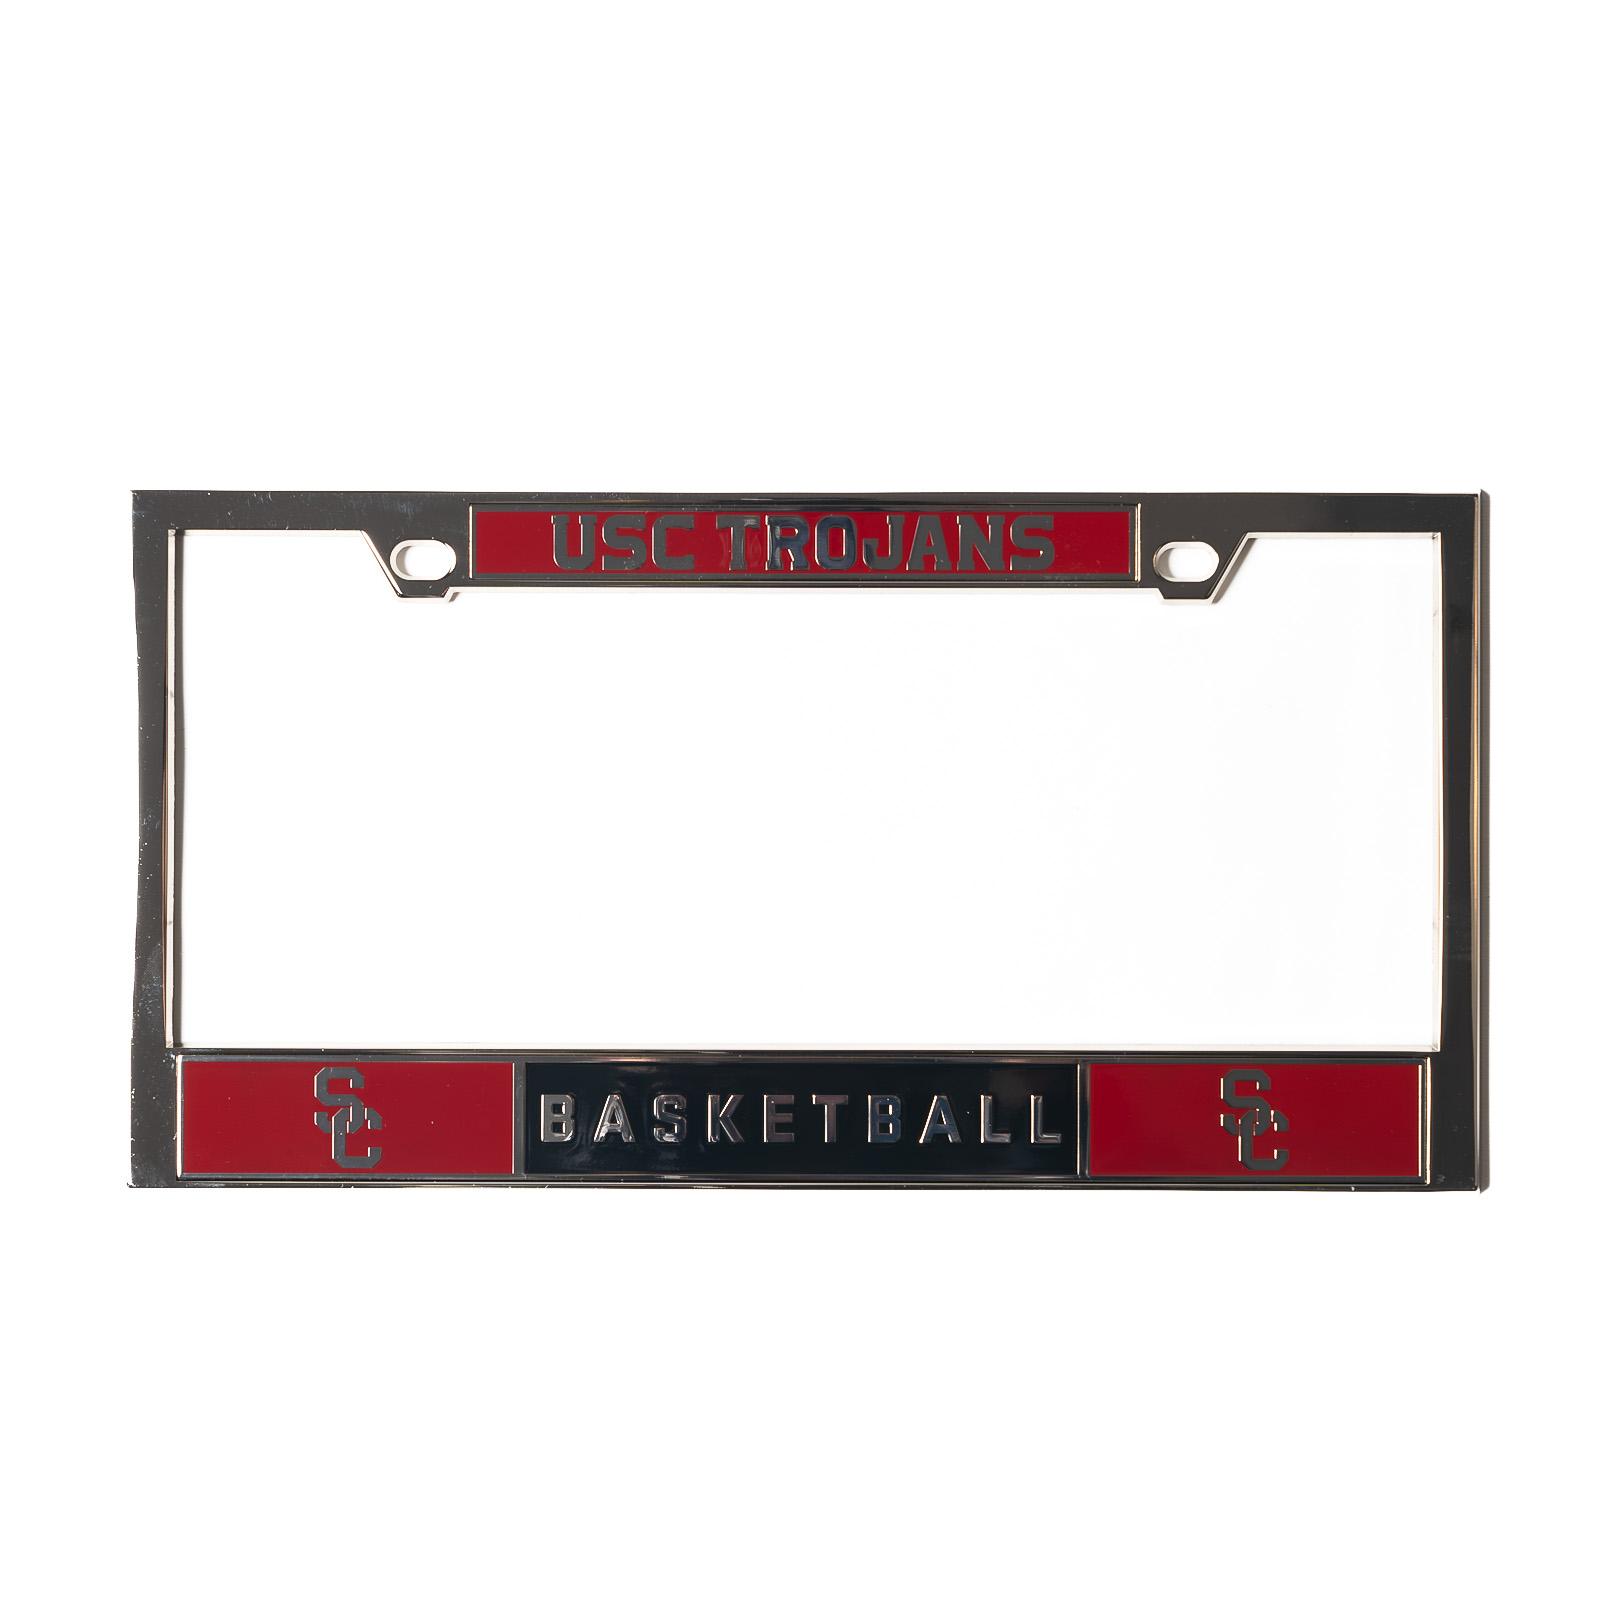 SC Interlock Basketball License Plate Frame Chrome by The U Apparel & Gifts image01